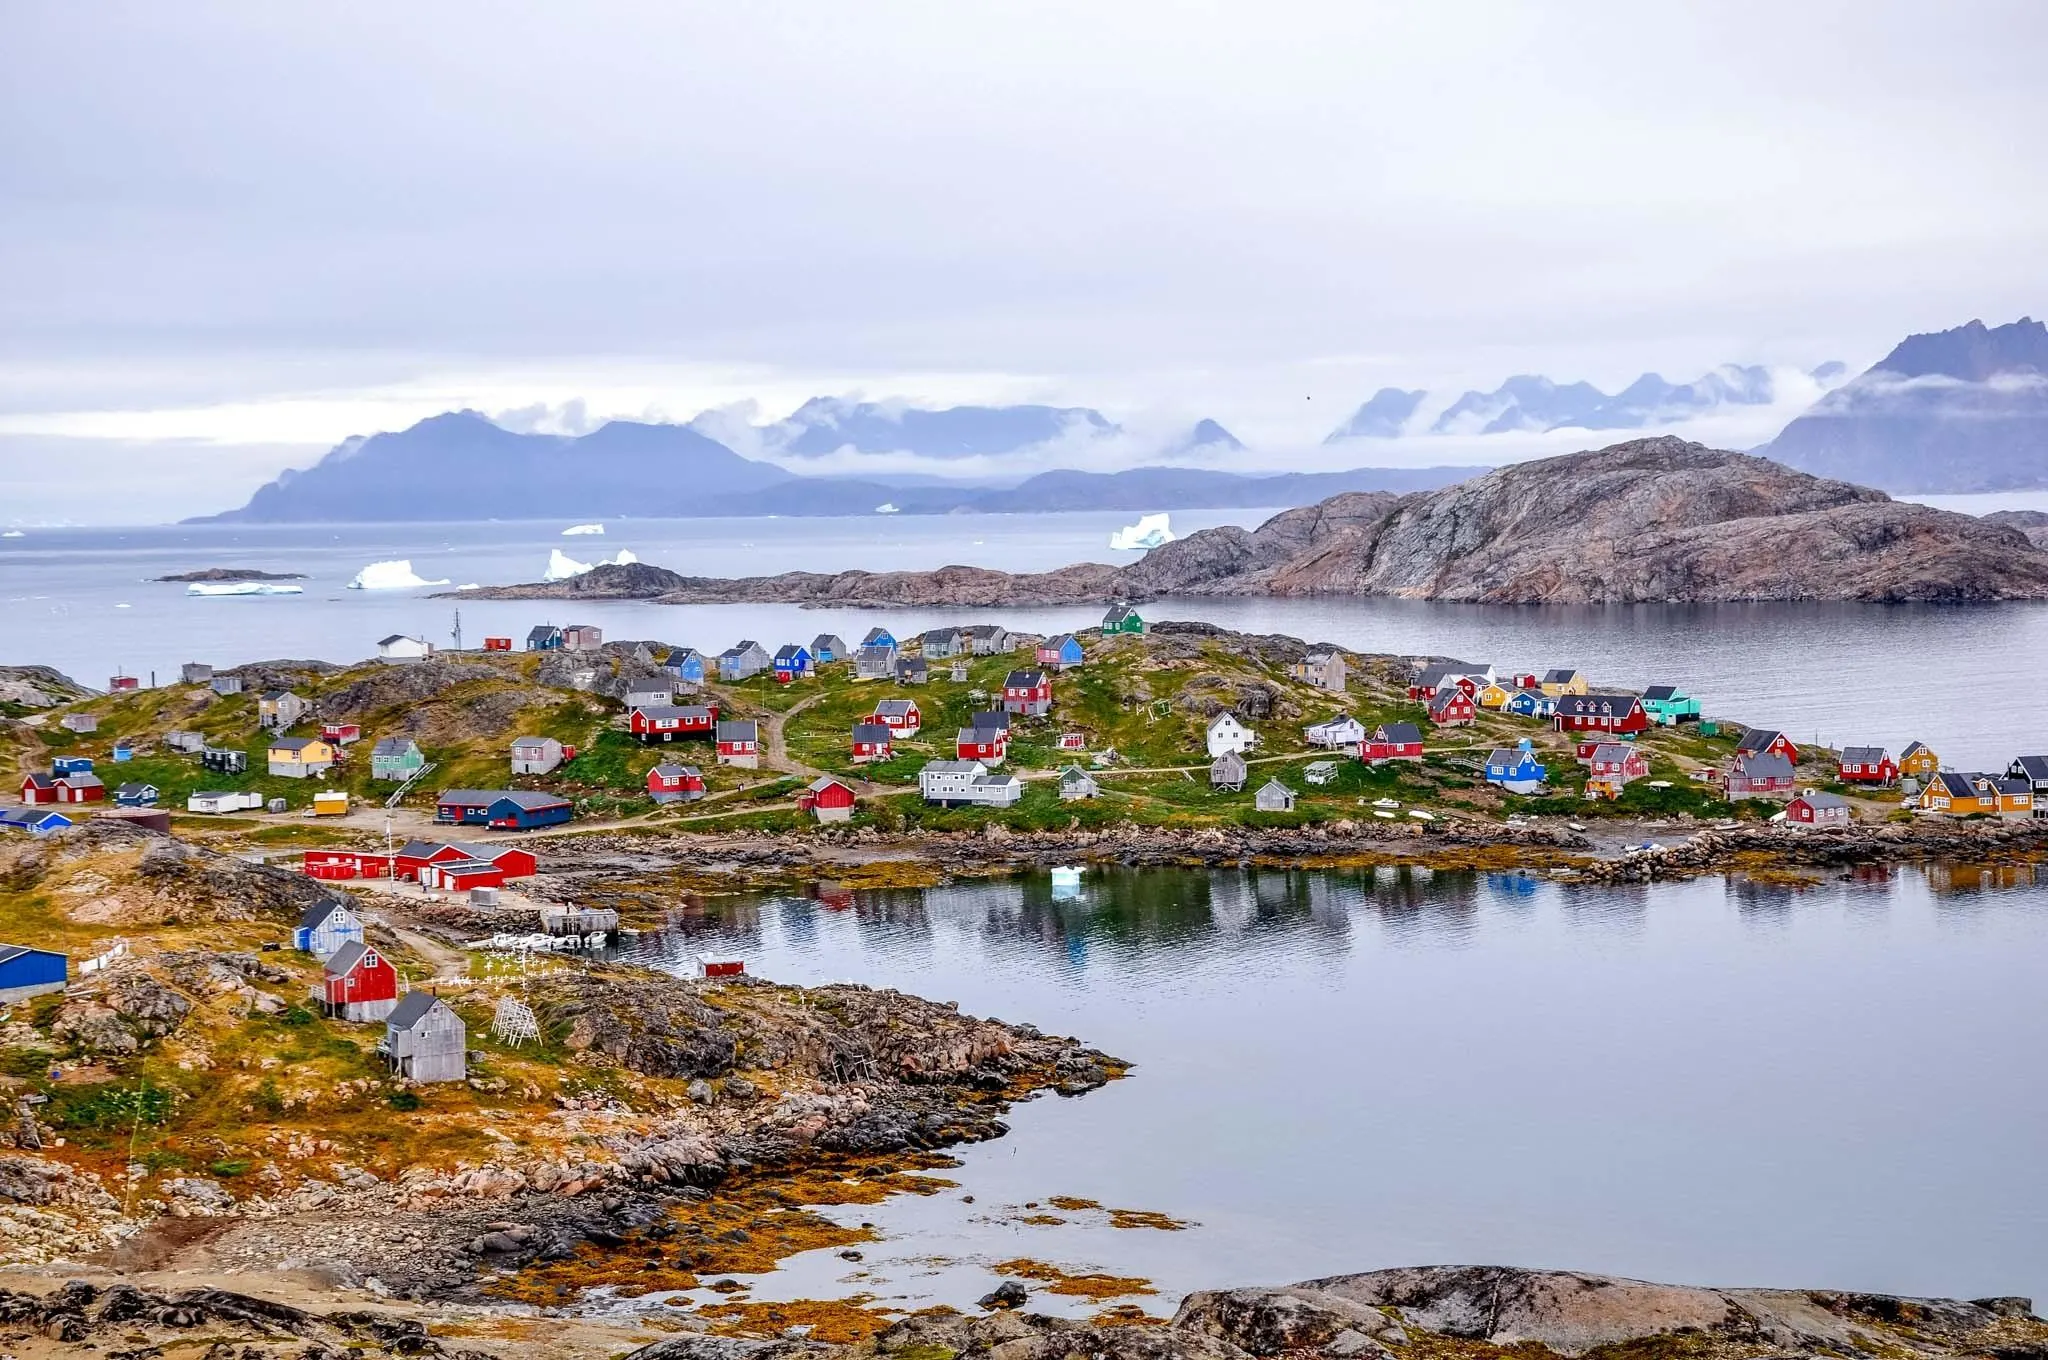 Harbor and colorful homes along the coastline of Greenland.